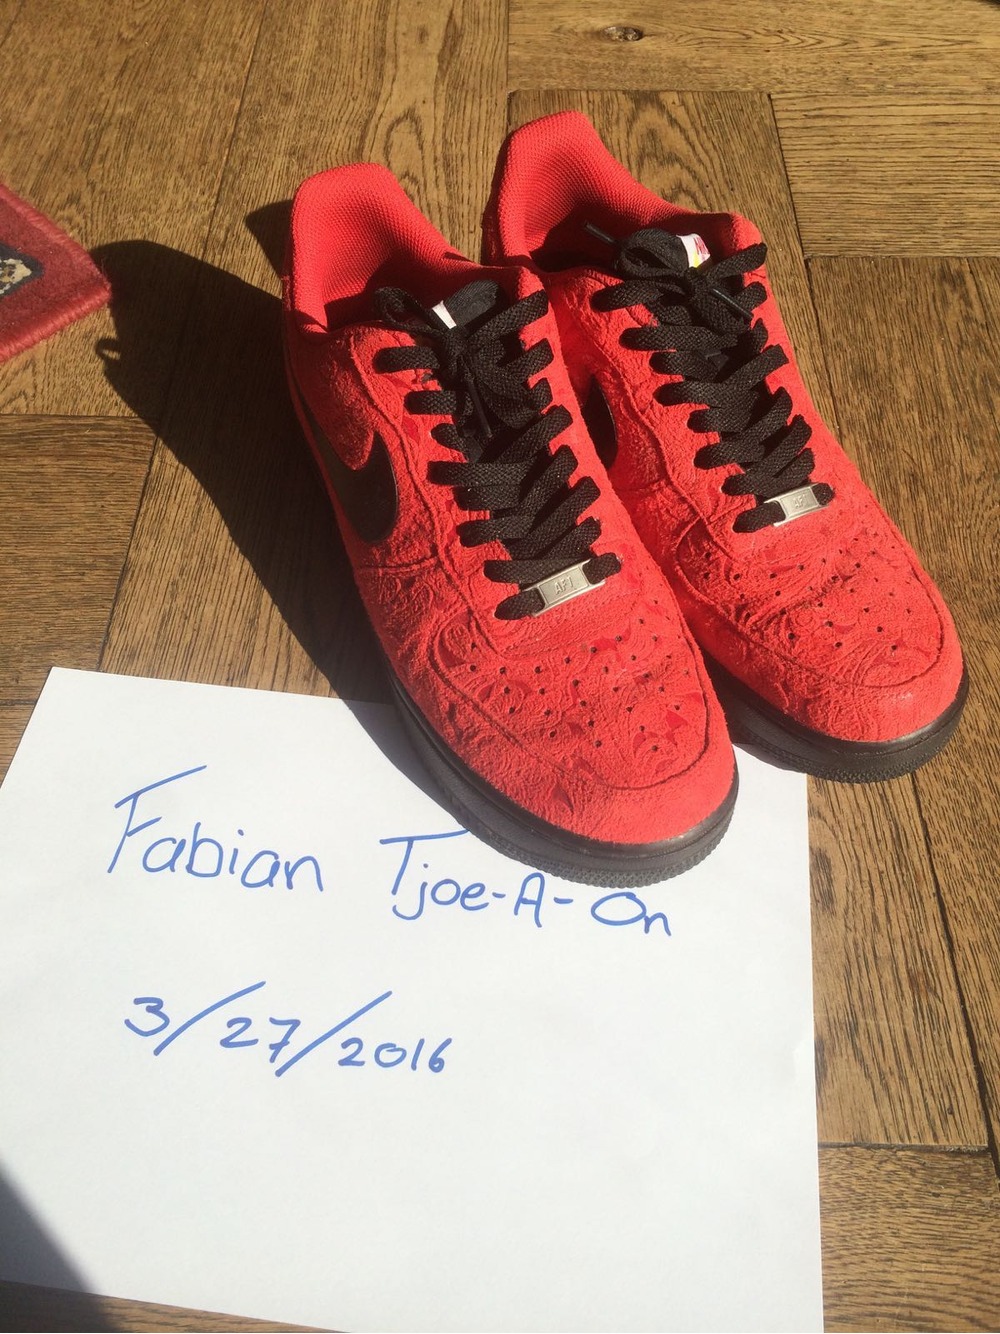 Buy Online air force 1 red black Cheap 